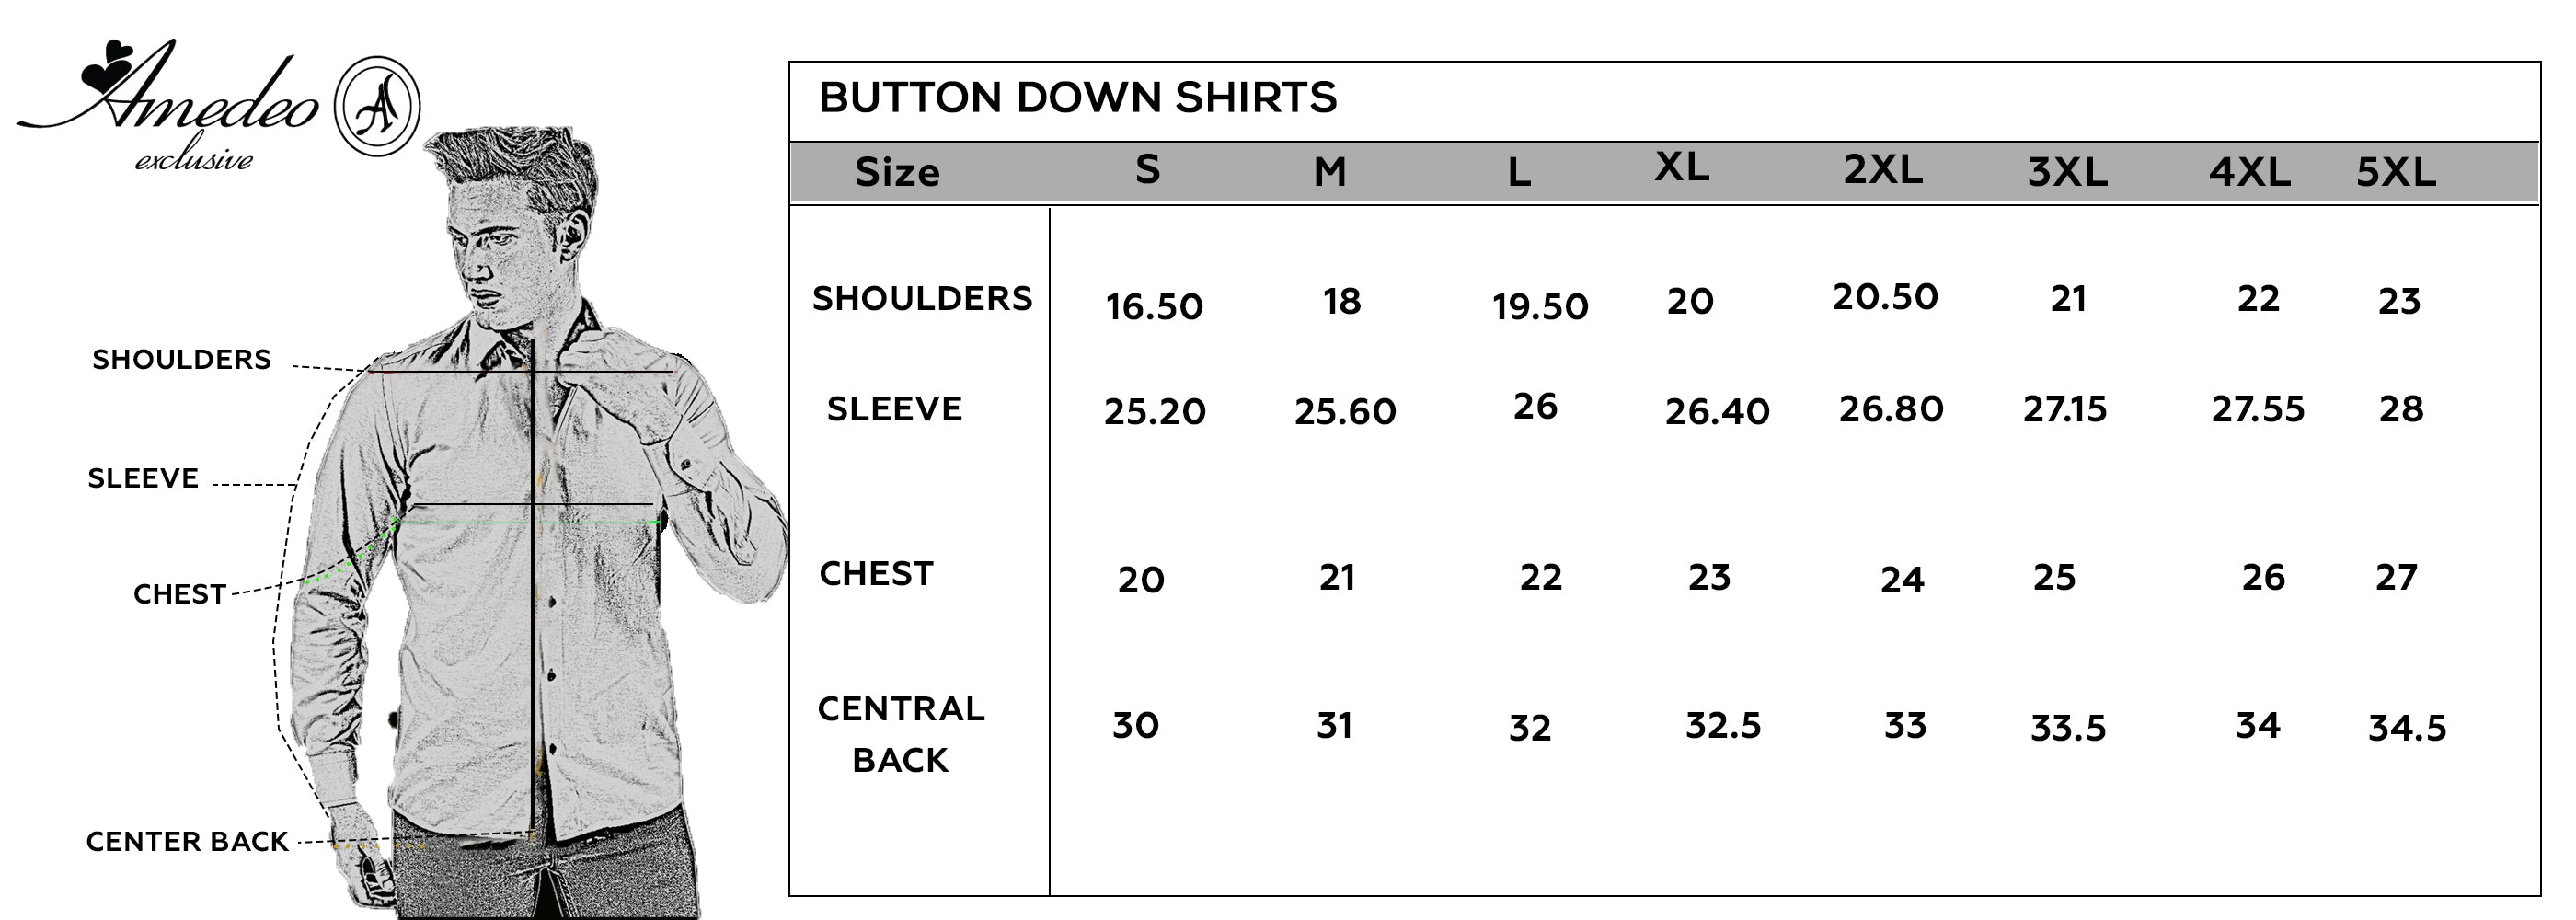 Black Mens Slim Fit Designer French Cuff Shirt - Tailored Cotton Shirts For Work And Casual